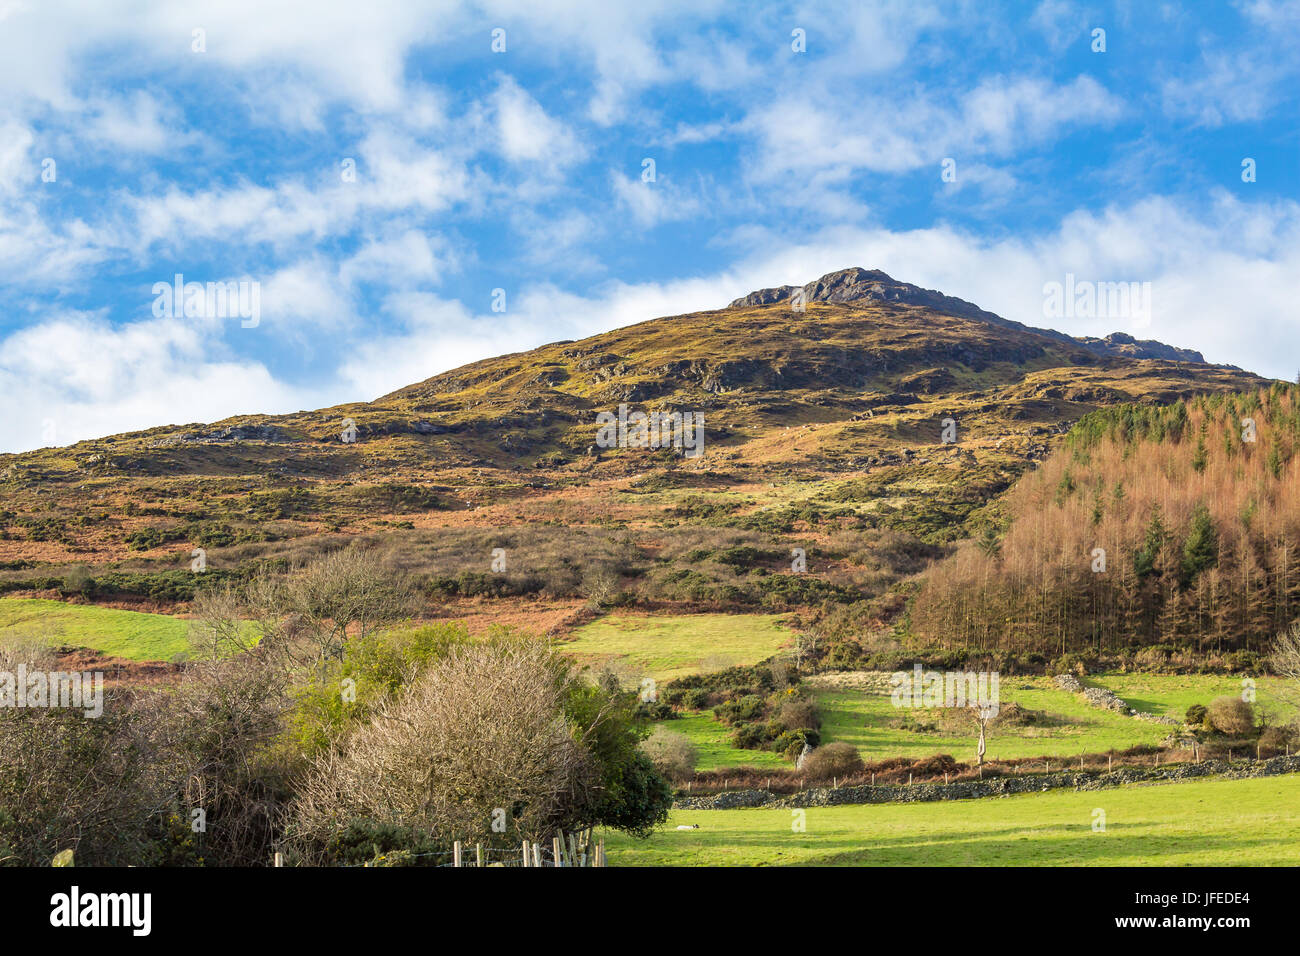 Slieve Foy, Carlingford Mountain, shot from Carlingford, County Louth, Ireland Stock Photo